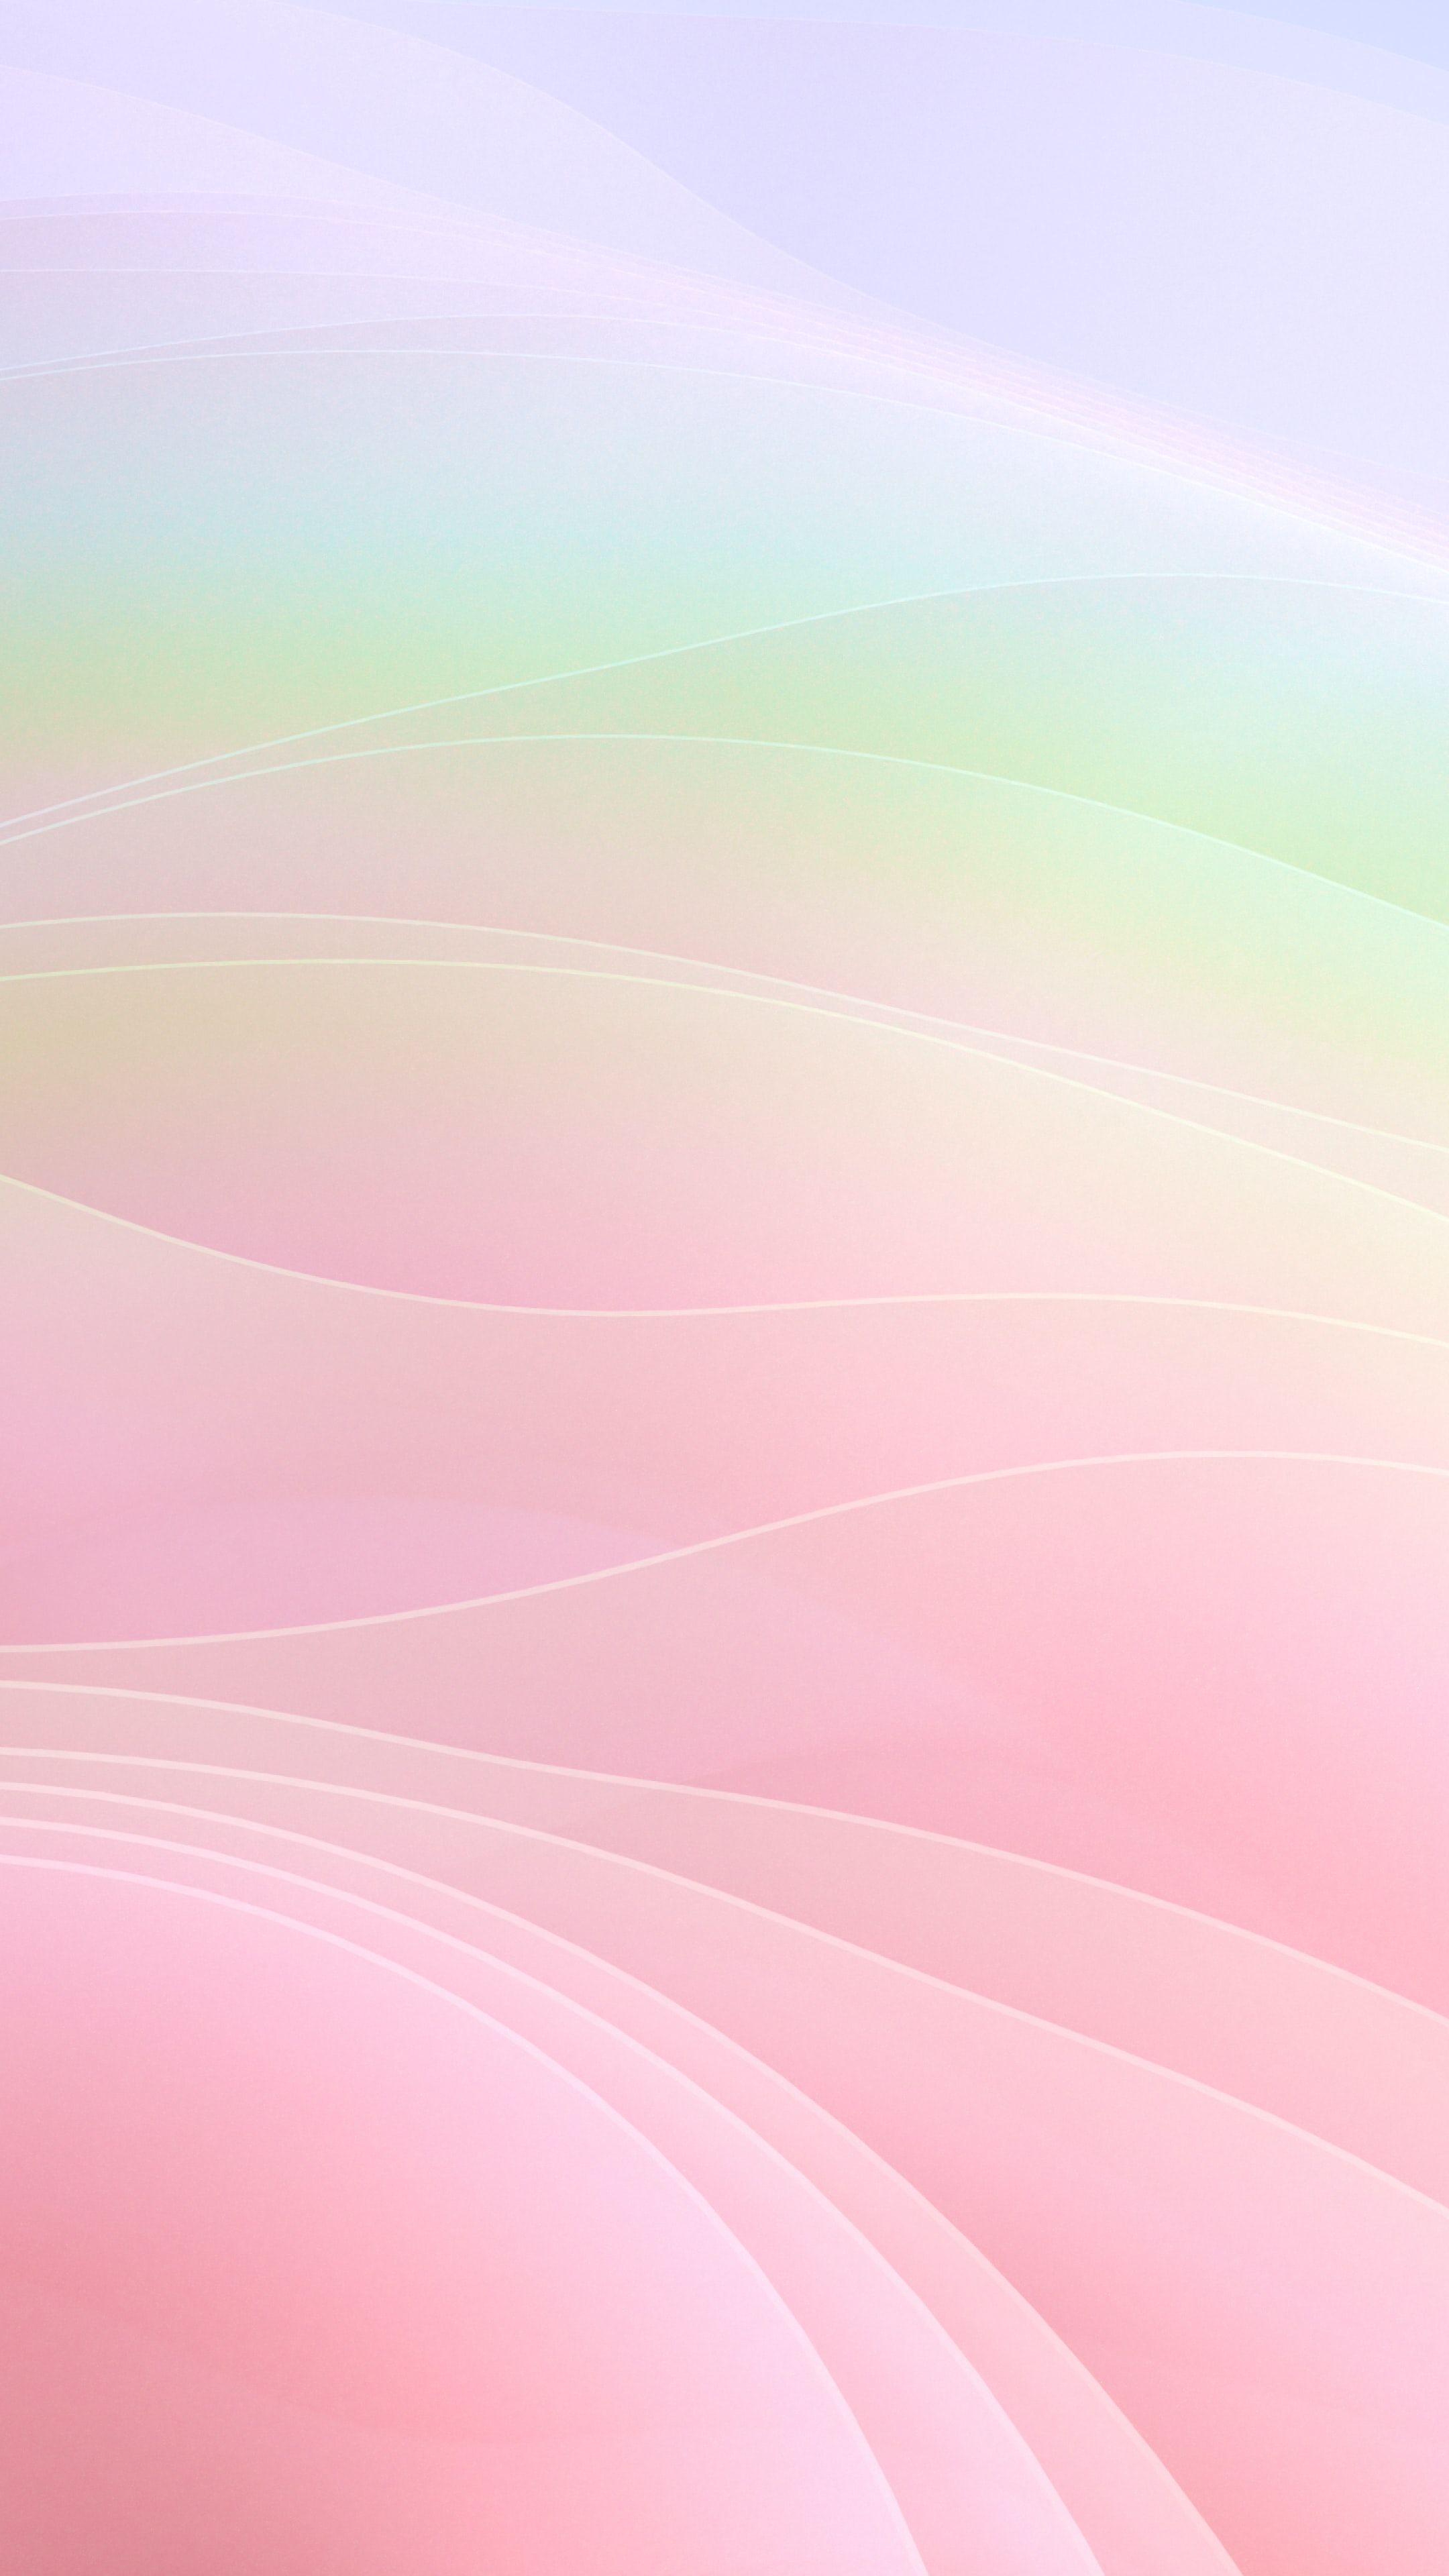 A pink and purple abstract background - Modern, clean